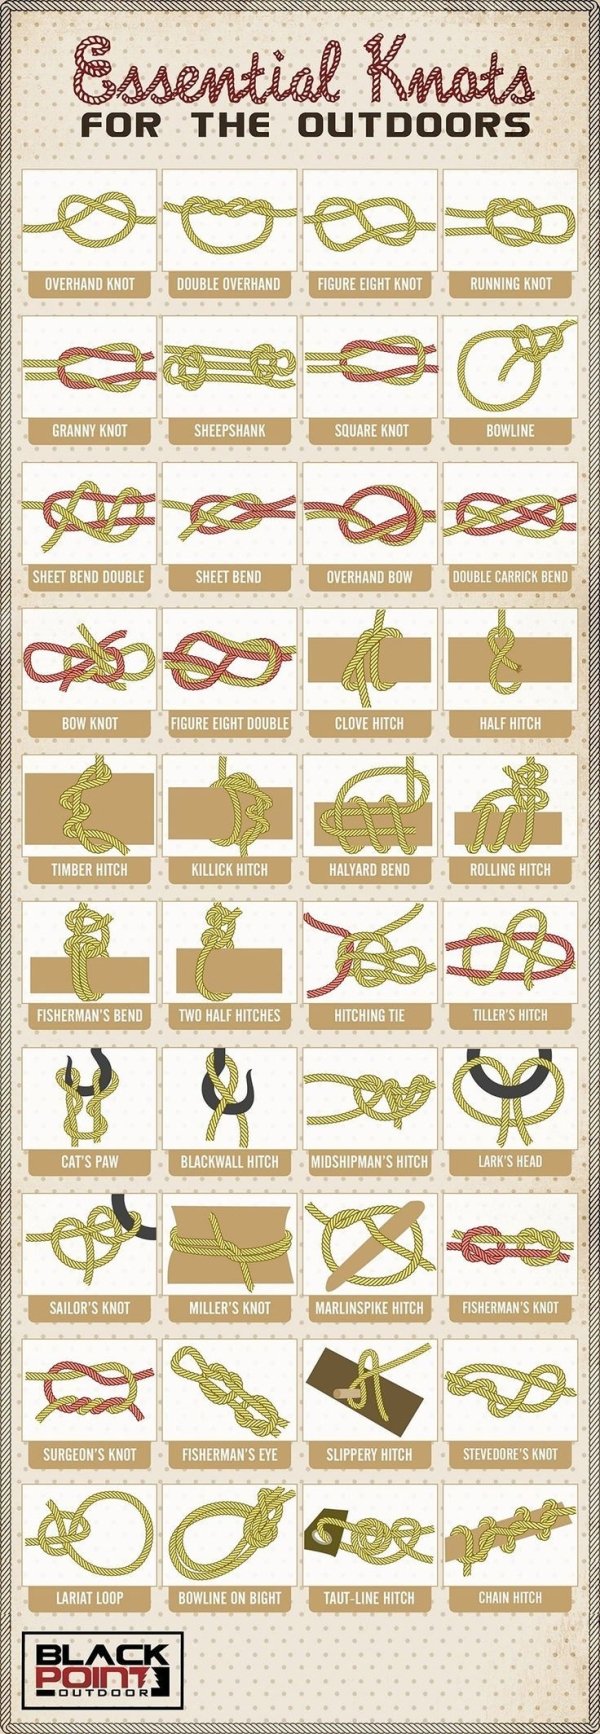 essential knots for the outdoors - Essential Knots For The Outdoors Overhand Knot Double Overhand Figure Eight Knot Running Knot Granny Knot Sheepshank Square Knot Bowline Sheet Bend Double Sheet Bend Overhand Bow Double Carrick Bend os o Bow Knot Figure